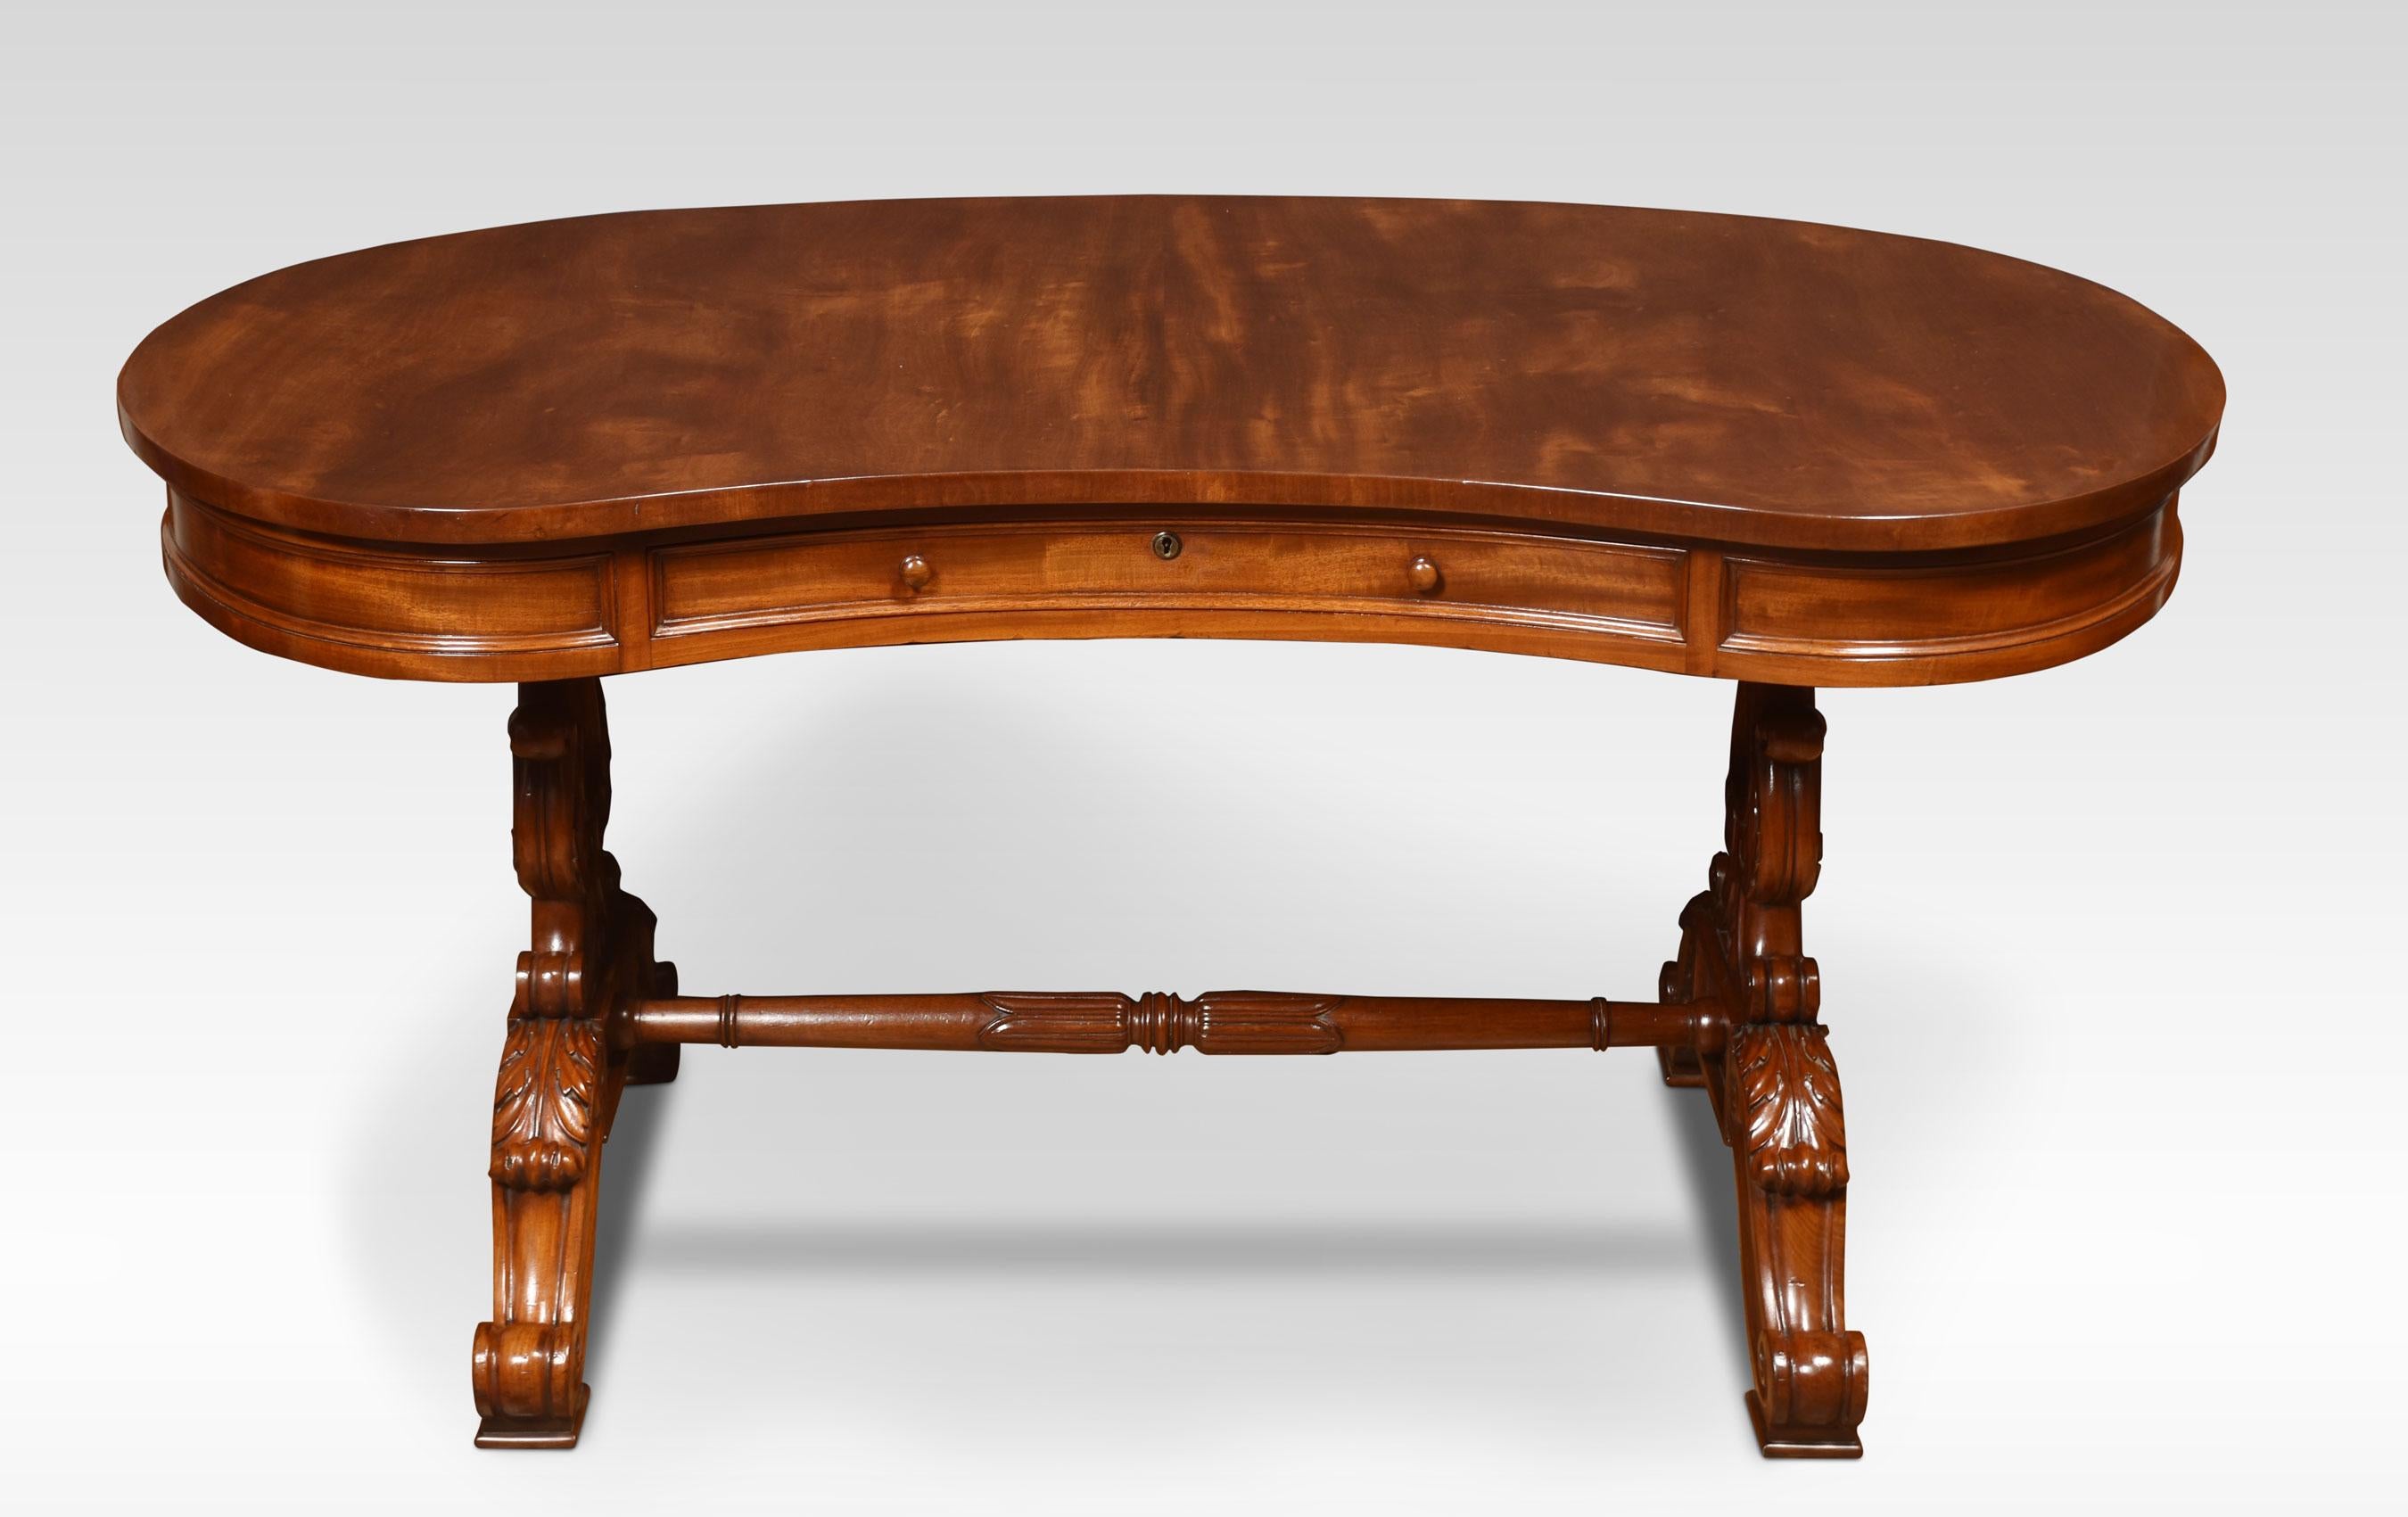 Very large William IV mahogany dressing table the large well figured kidney shaped top above moulded freeze with central drawer. All raised up on shaped supports terminating in scrolling legs. United by turned stretcher.
Dimensions
Height 29.5